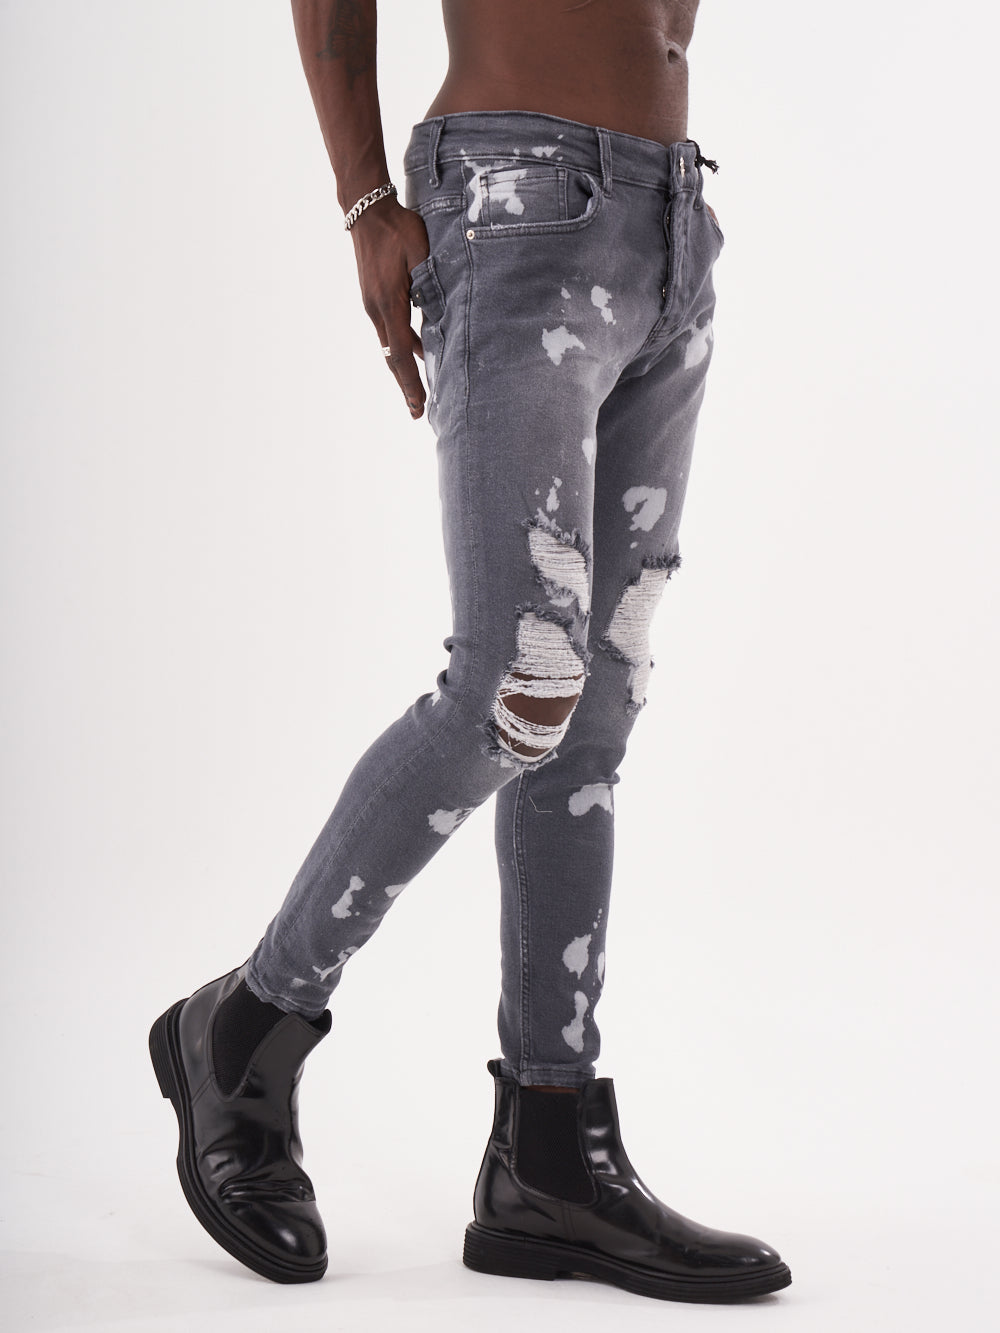 A man wearing the product name MAVERICK jeans and black boots.